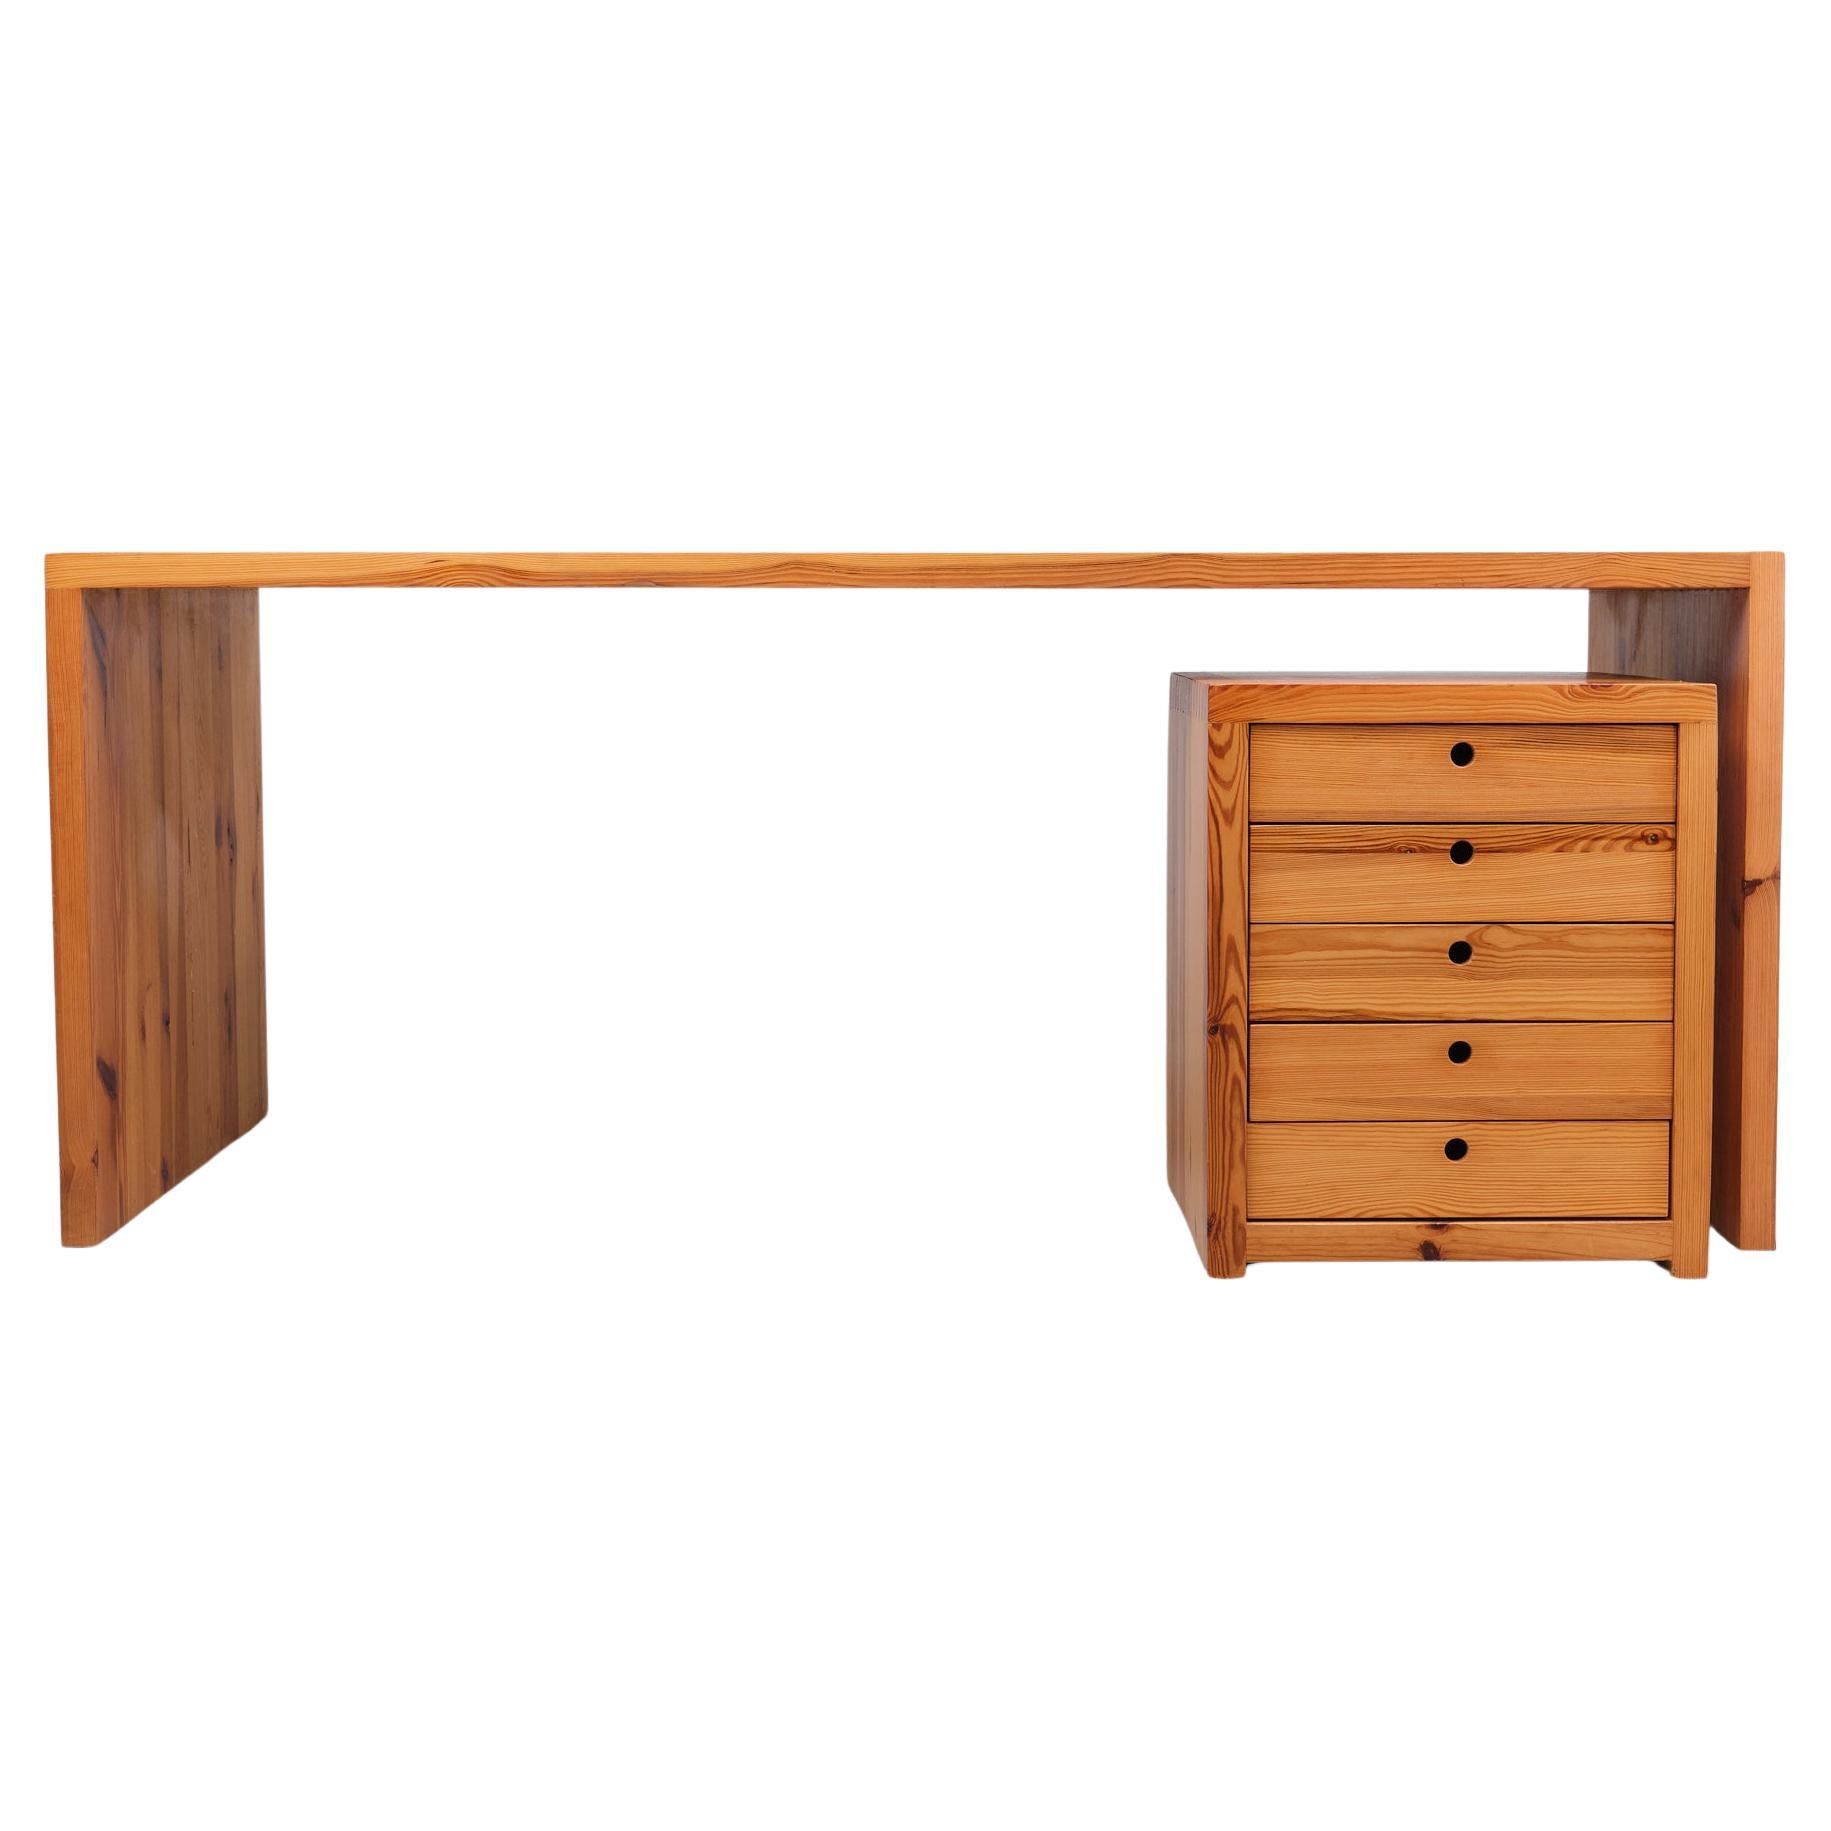 Ate van Apeldoorn  Large Writing Desk and cabinet block . 1960s Holland  For Sale